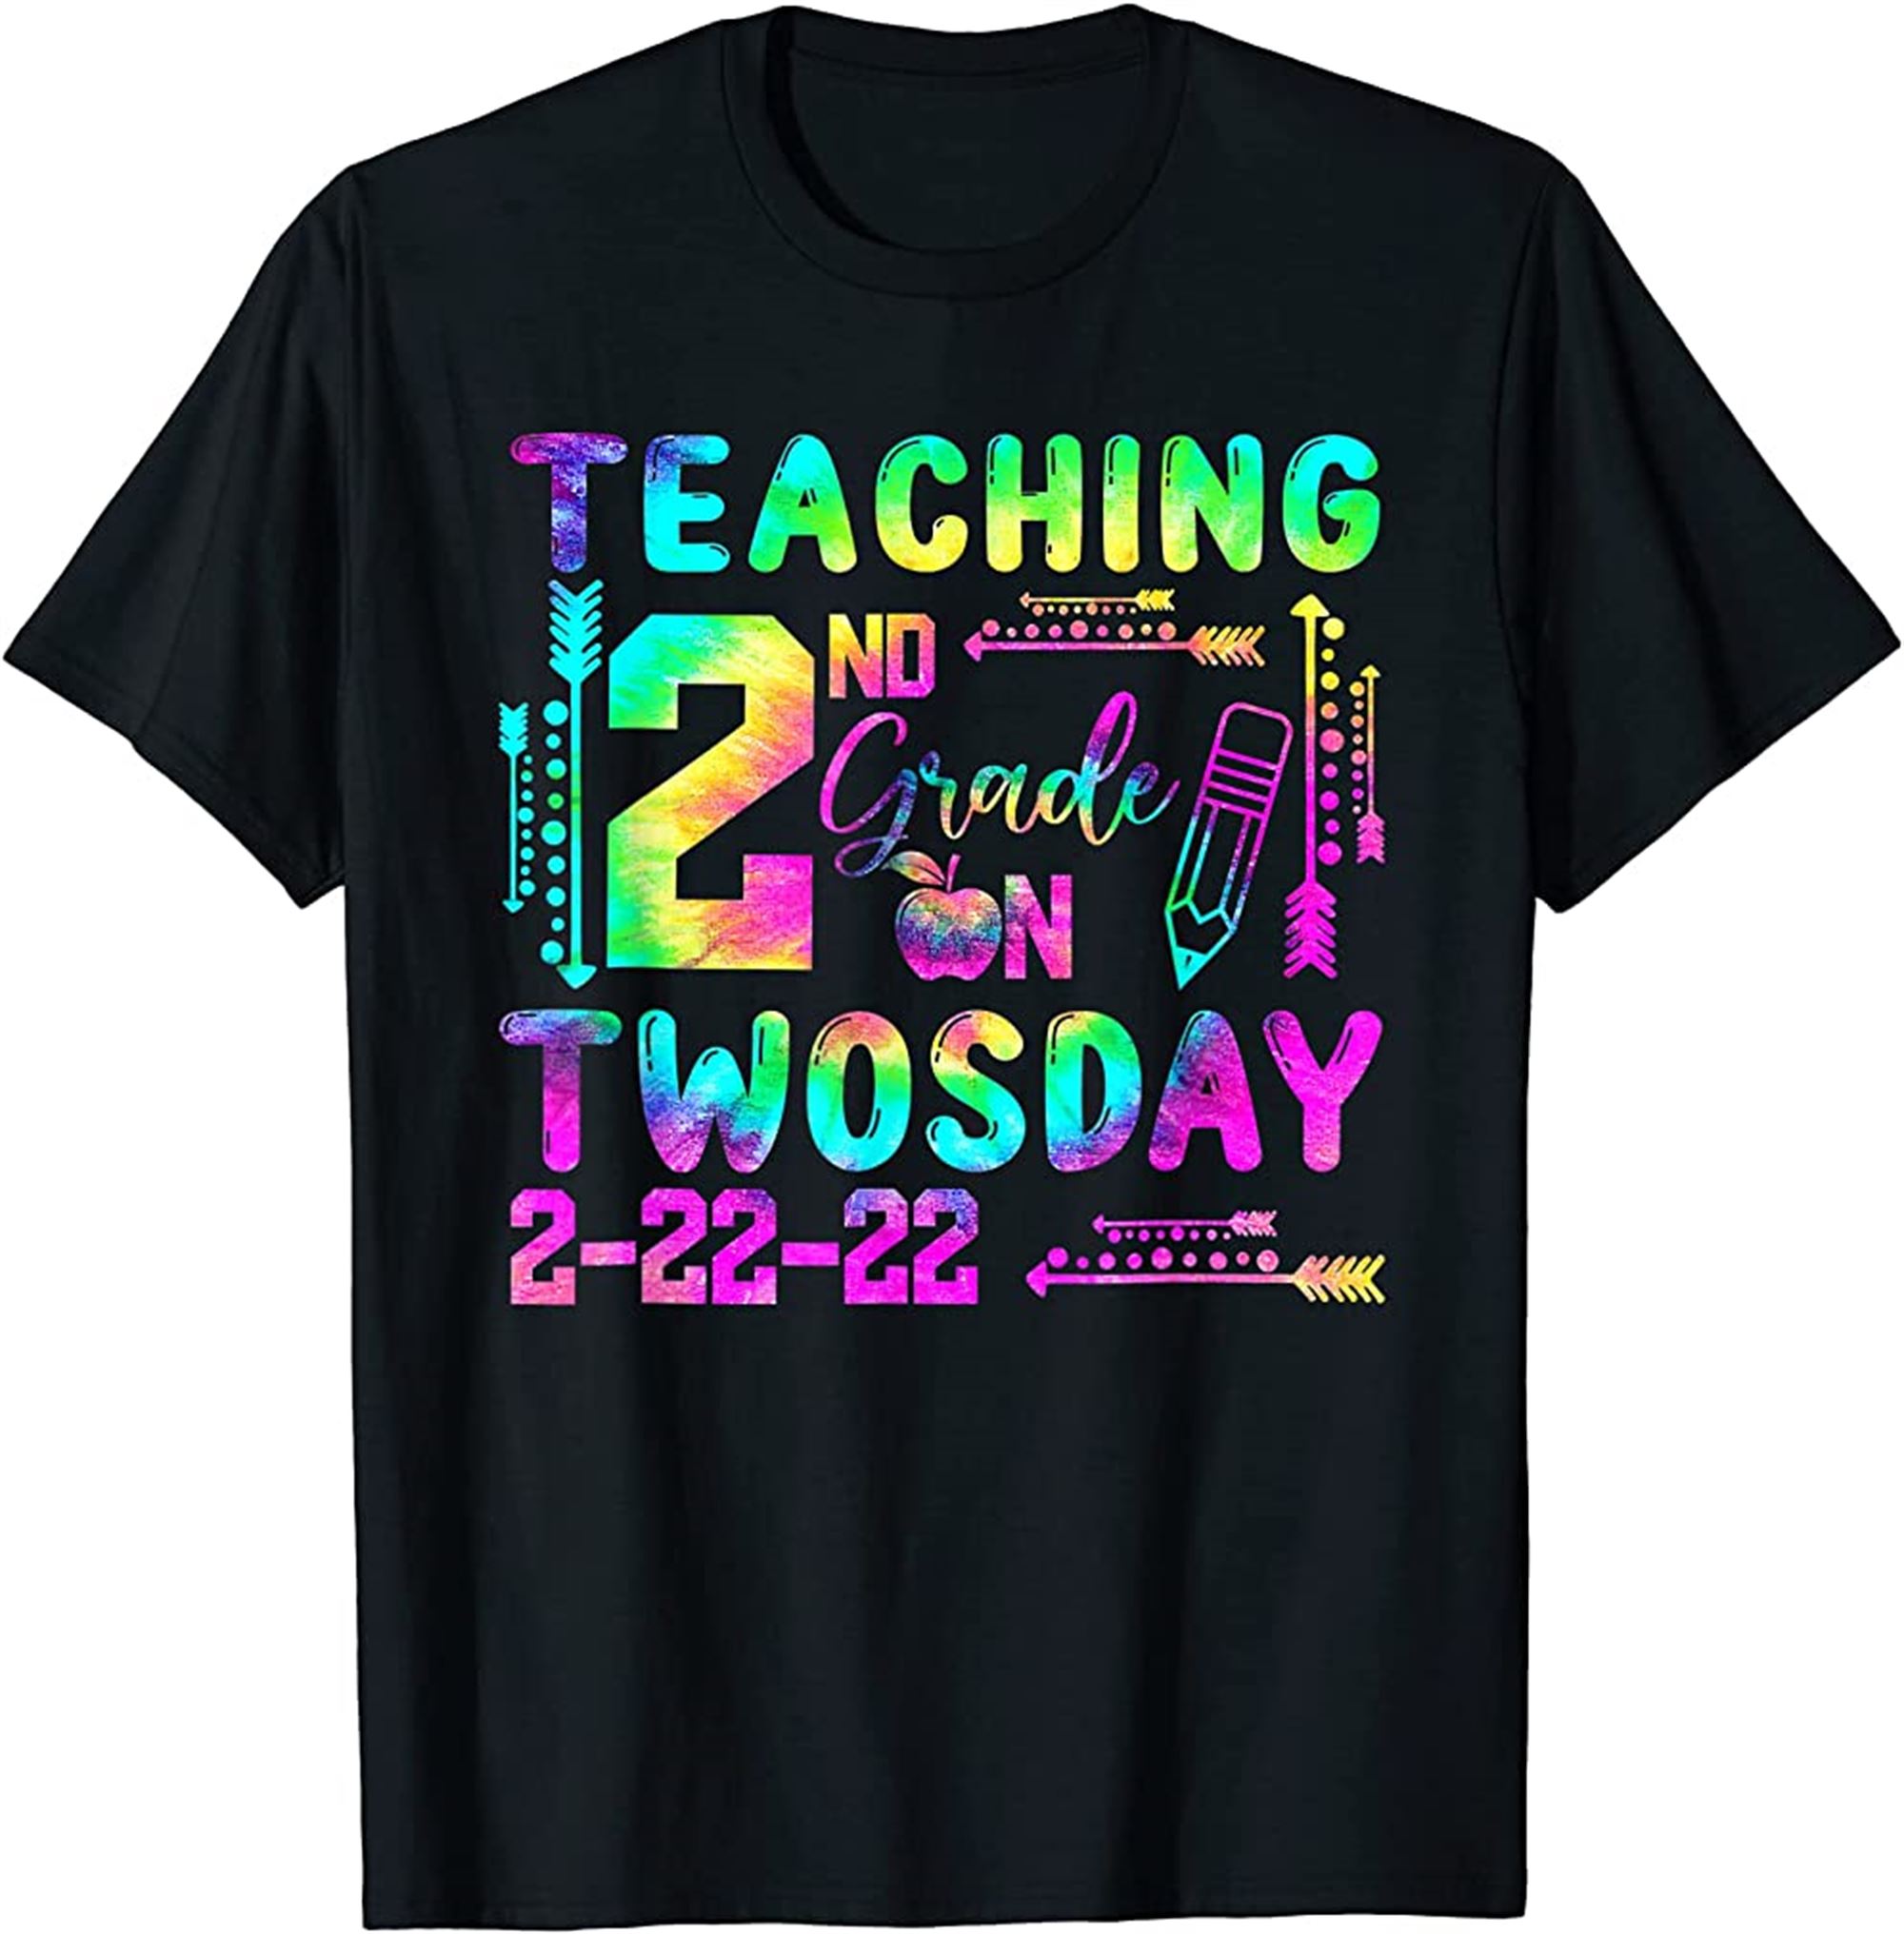 Twosday Tuesday February 22nd 2022 Cute 22222 Second Grade T-shirt Full Size Up To 5xl